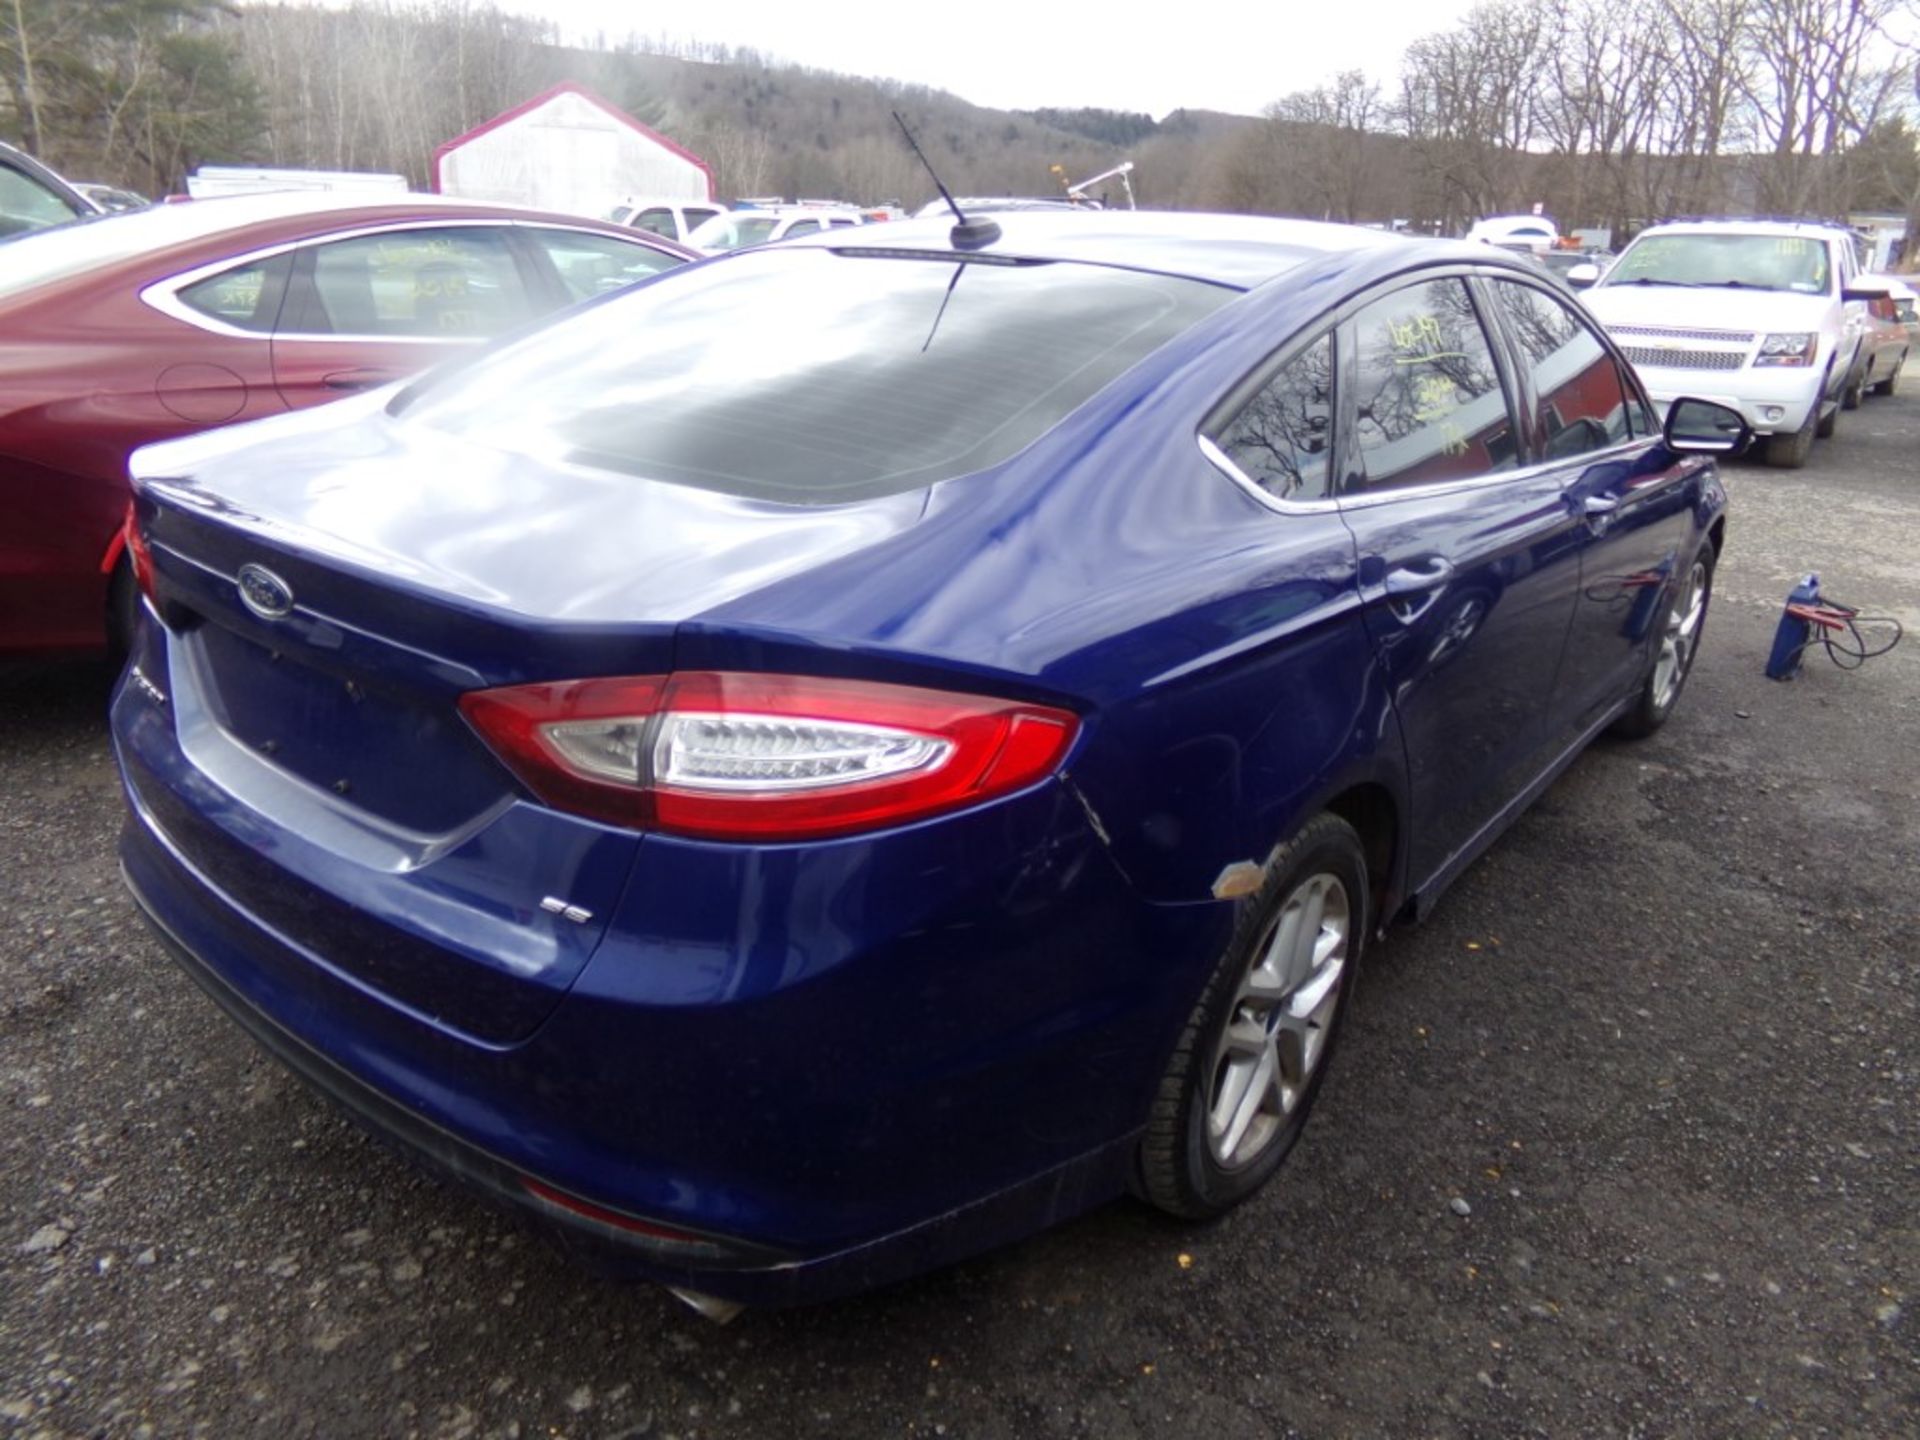 2014 Ford Fusion SE, Blue, 174,739 Miles, VIN#1FA6P0H7XE5365423, AIR BAG LIGHT IS ON, MINOR DAMAGE - Image 5 of 18